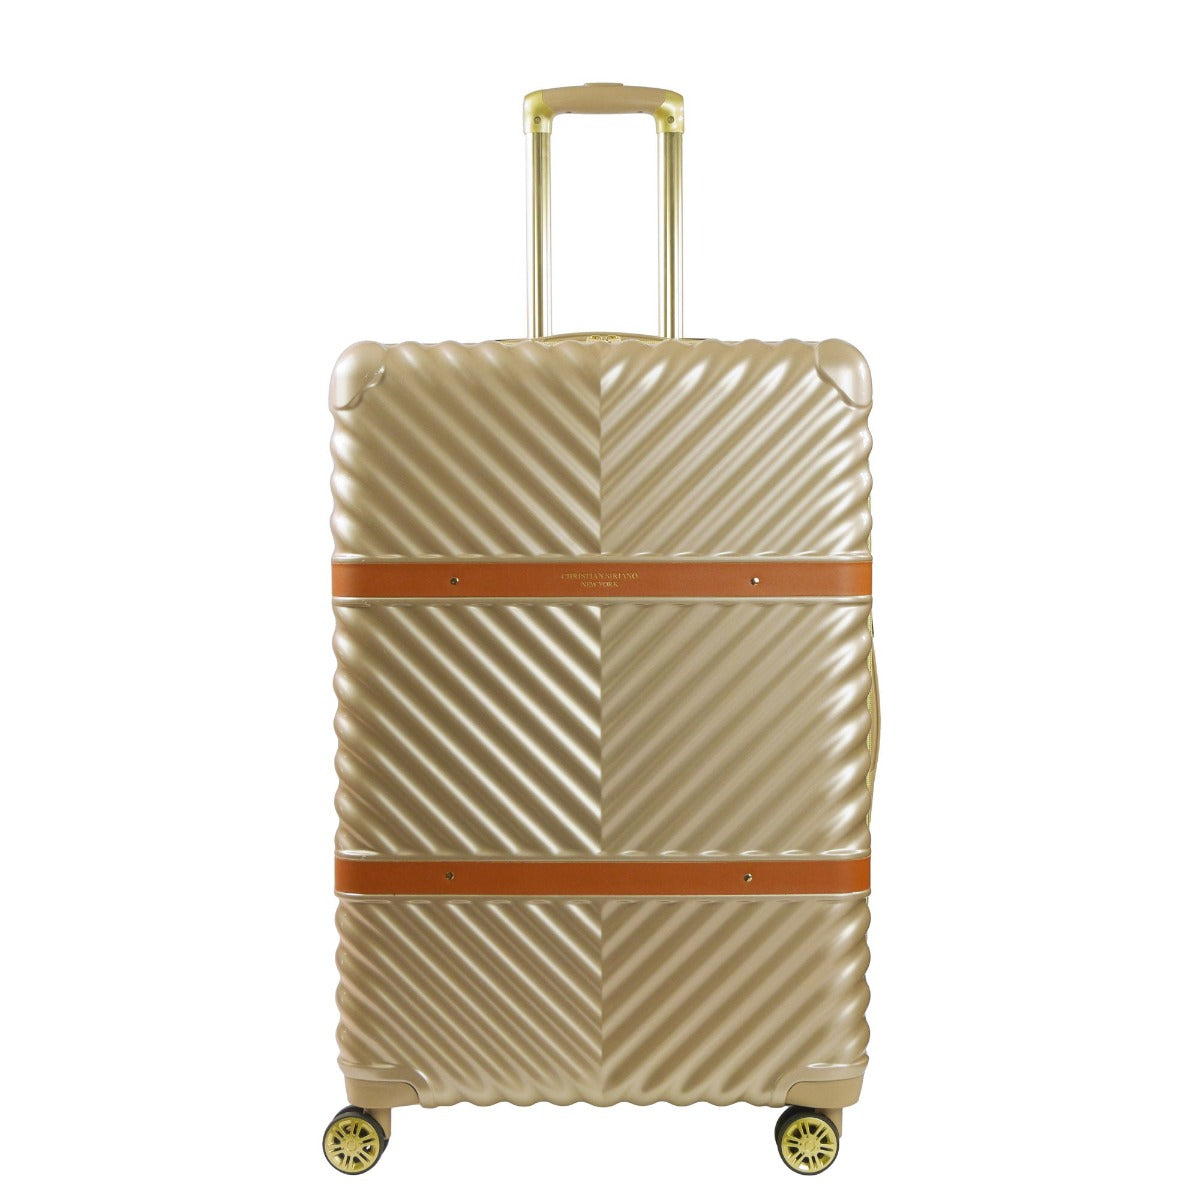 Christian Siriano New York Stella 29" hardside spinner luggage taupe - best checked suitcase for travel